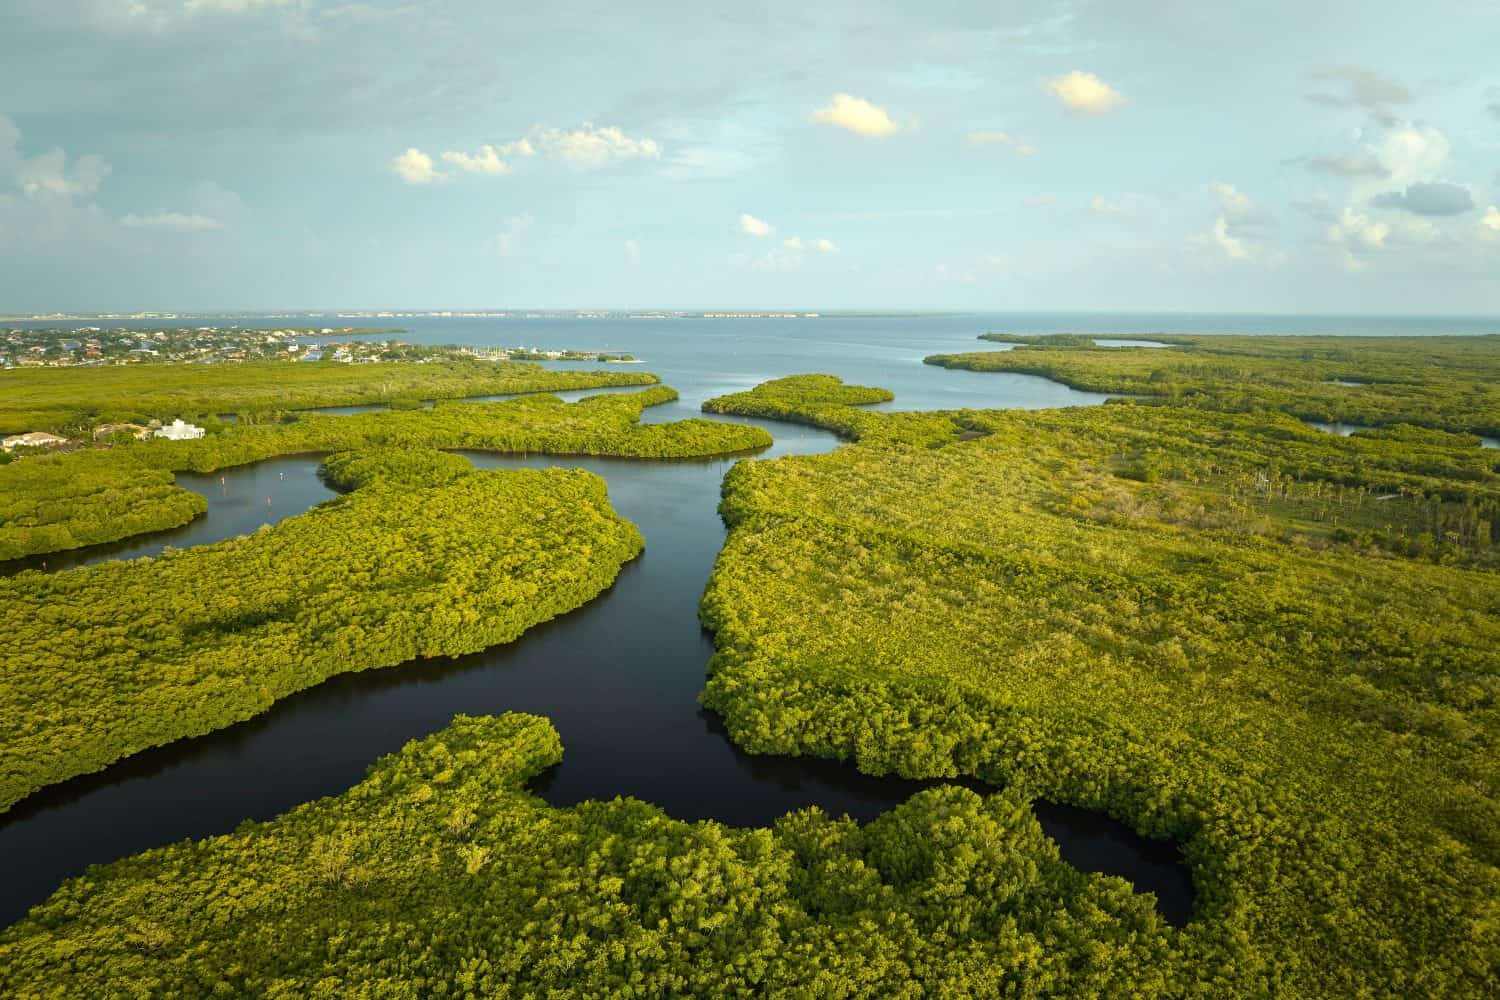 <ul> <li><strong>Location:</strong> South Florida</li> <li><strong>Known For:</strong> Covering 7,800 square miles across Florida, it's a wetland ecosystem with a surplus of wildlife.</li> </ul> <p>Rising sea levels are affecting Florida's coastlines, and if the predictions ring true, then the Everglades National Park is in danger of disappearing altogether. The effects of global warming are already rearing their ugly head, with the rise of sea levels, warmer water temperatures, and higher salinity. The changing climate is also affecting the wildlife and plants that thrive in the Everglades.</p>